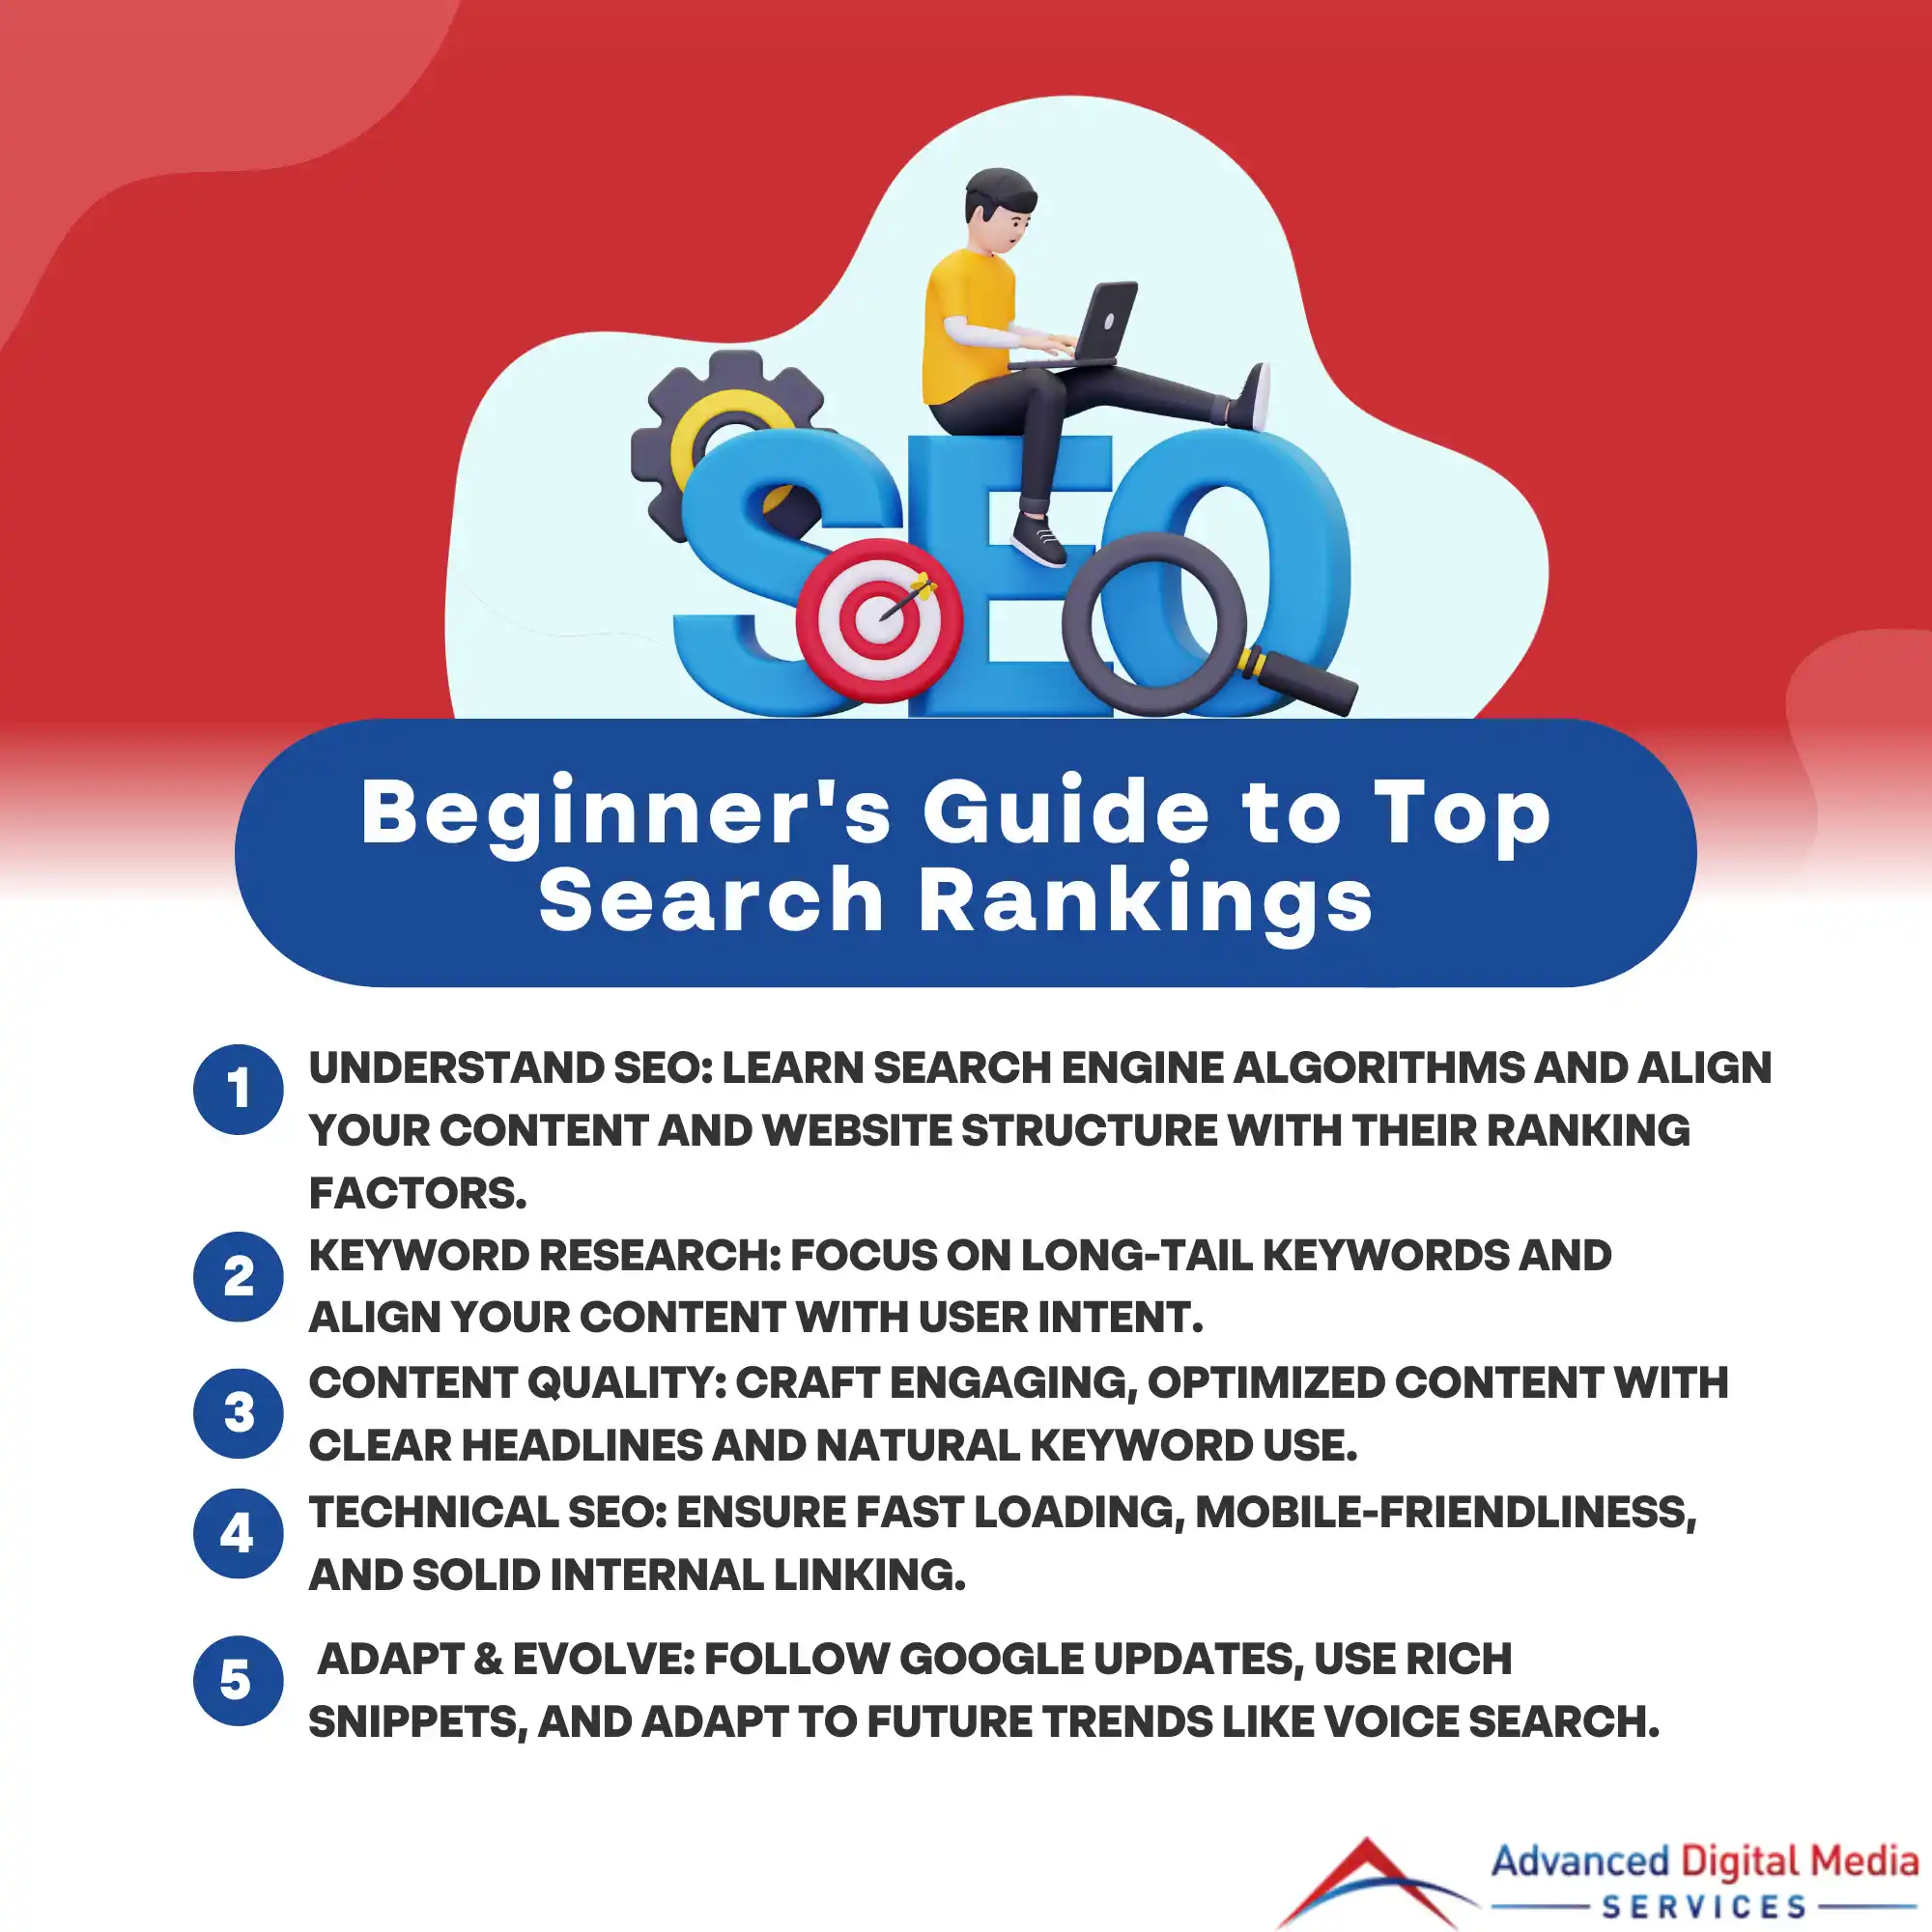 Beginner's Guide to Top Search Rankings Infographic